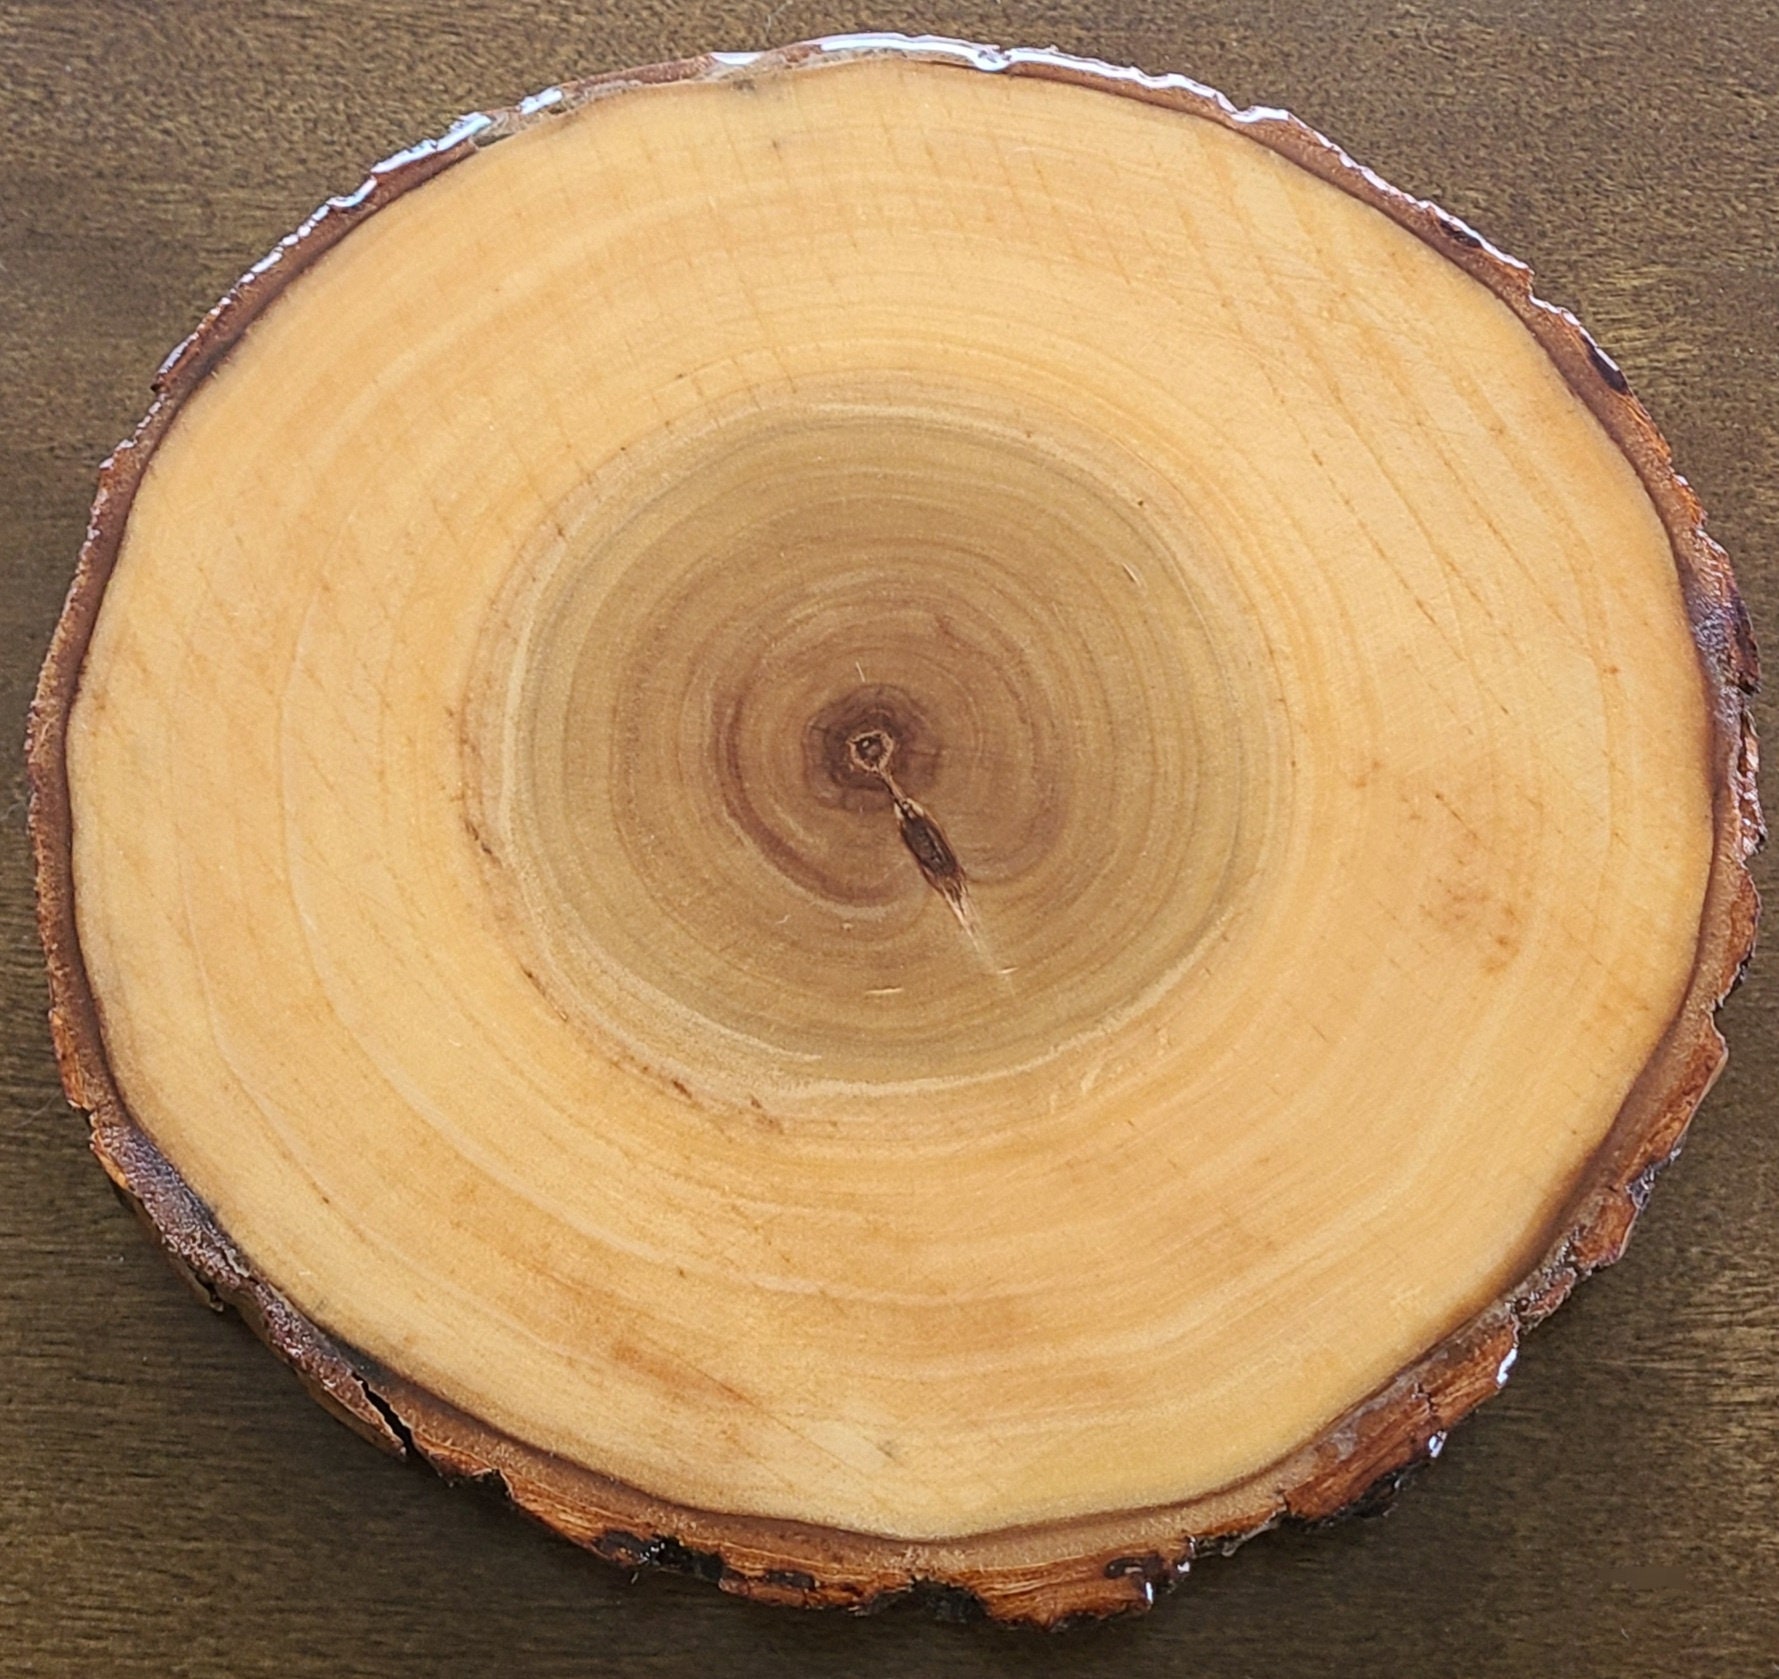 Set of 11-12 Inch Wood Slices for Rustic Wedding Centerpieces